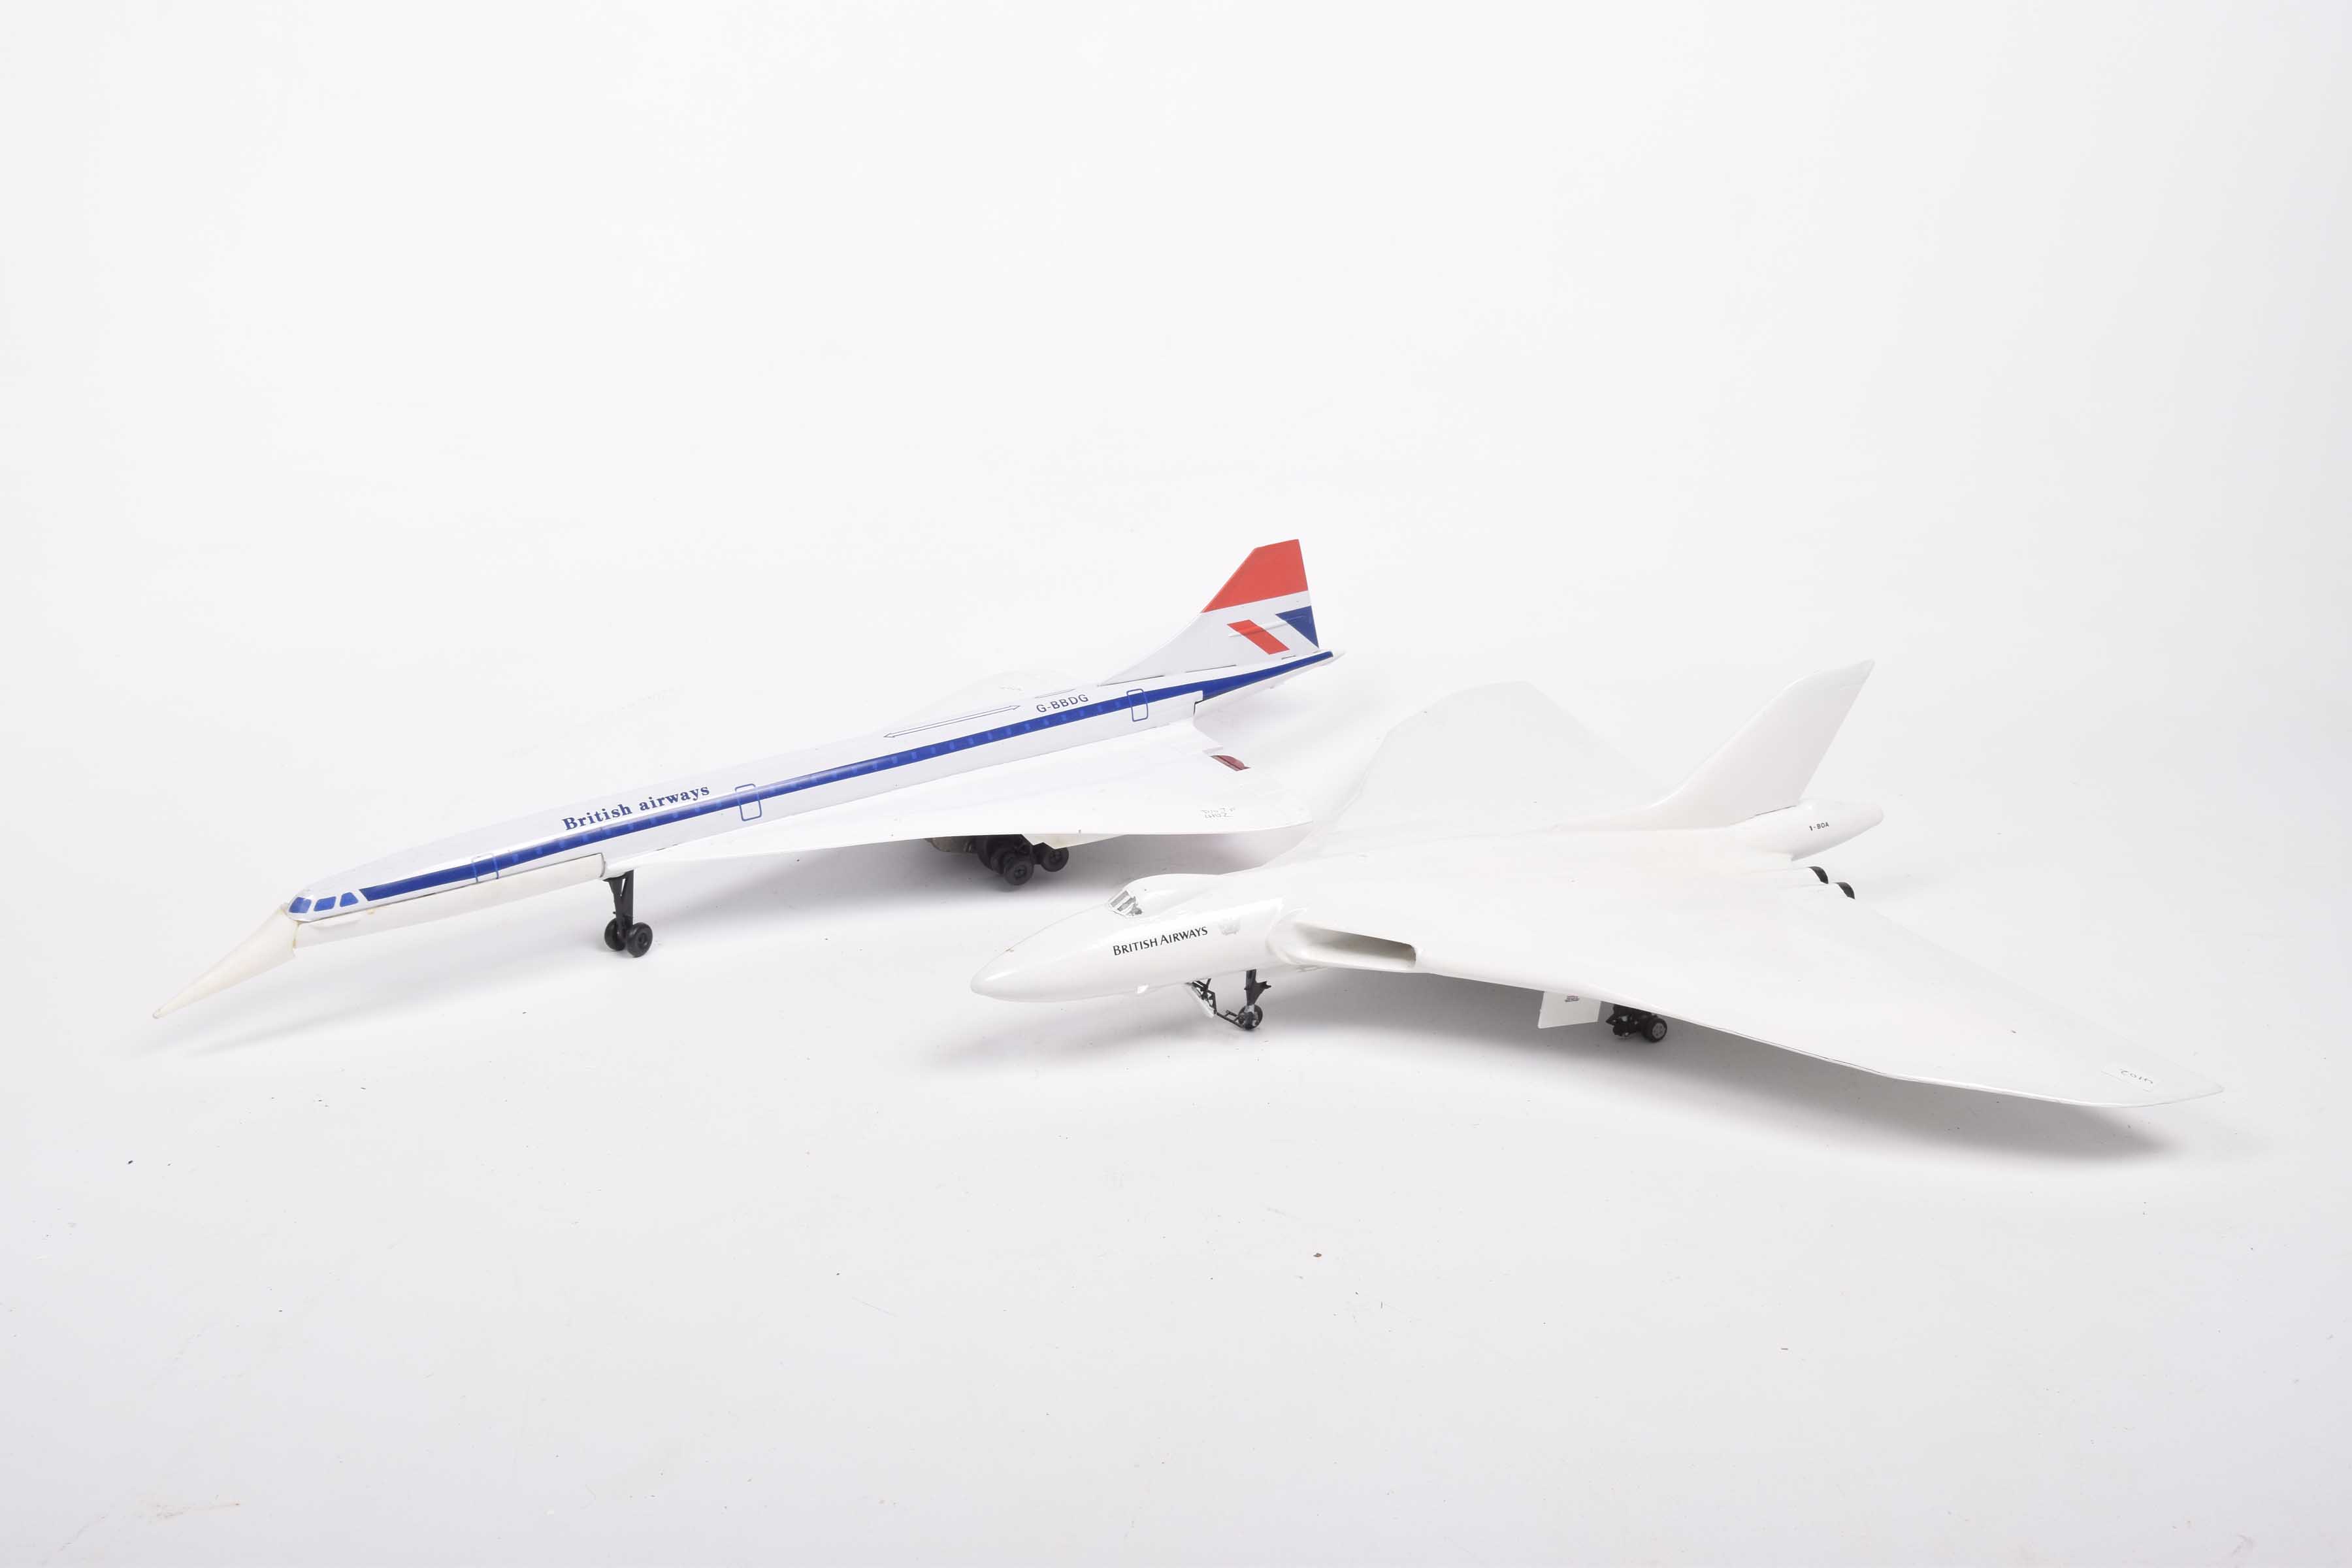 A scale model of Vulcan Bomber In British Airways livery and a Joustra French model of a Concorde